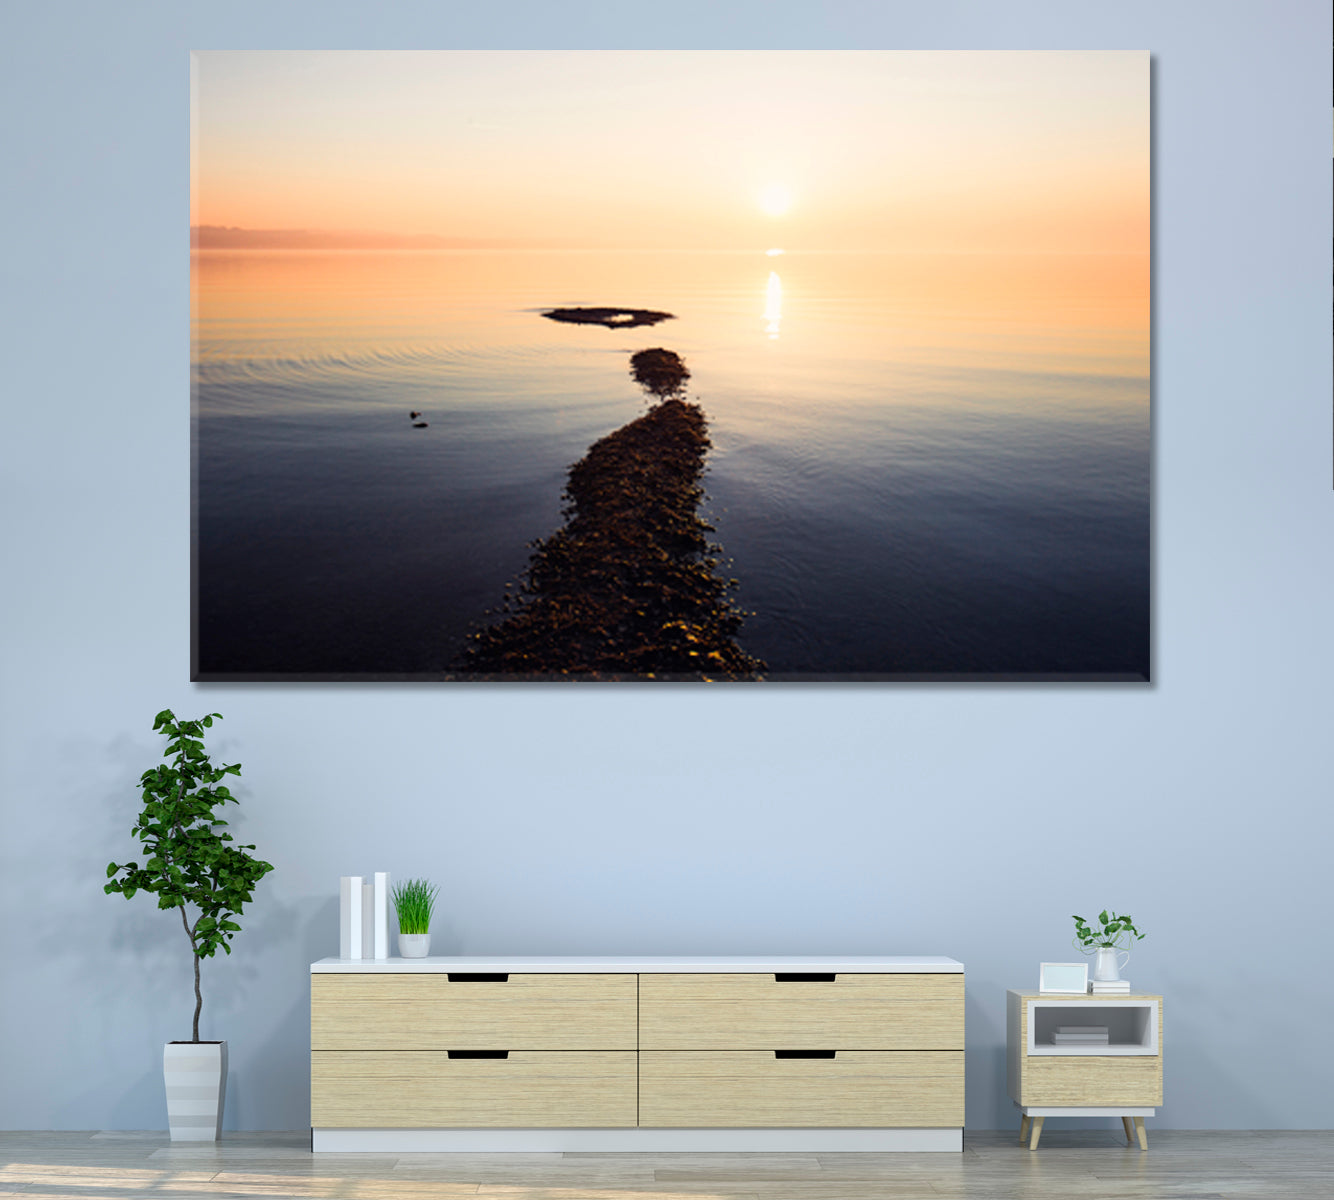 ROAD TO PARADISE Natural Landscape Scenery Sunrise at Bodensee Lake Germany Scenery Landscape Fine Art Print Artesty 1 panel 24" x 16" 